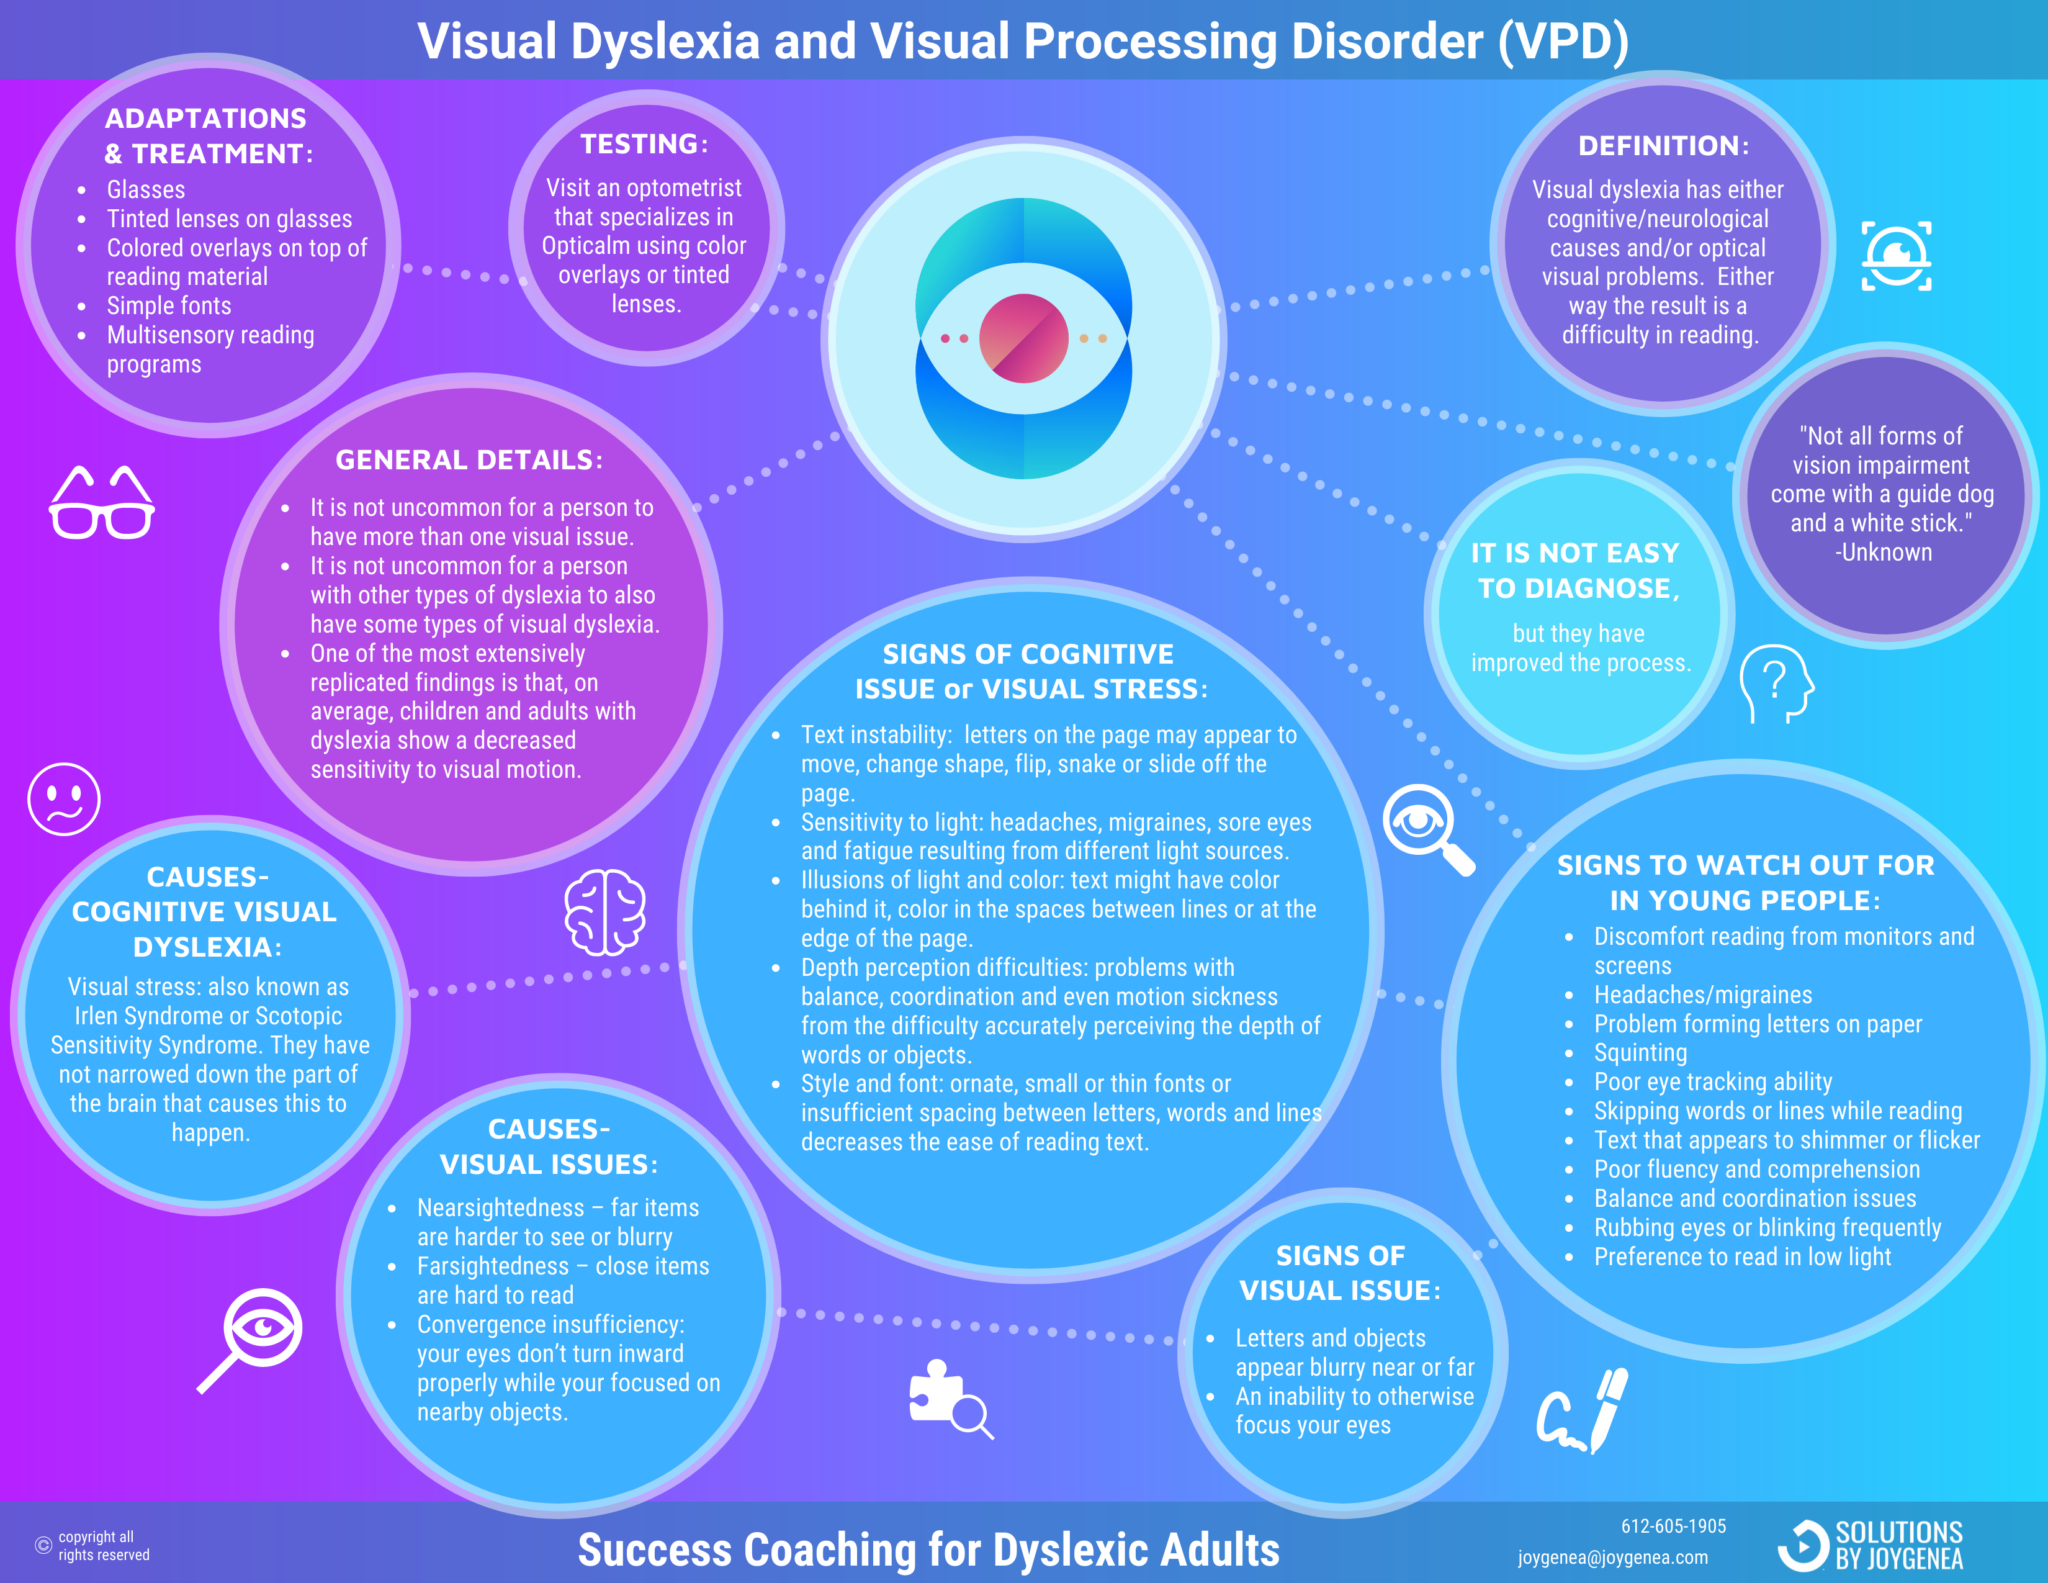 visual-dyslexia-and-visual-processing-disorder-vpd-solutions-by